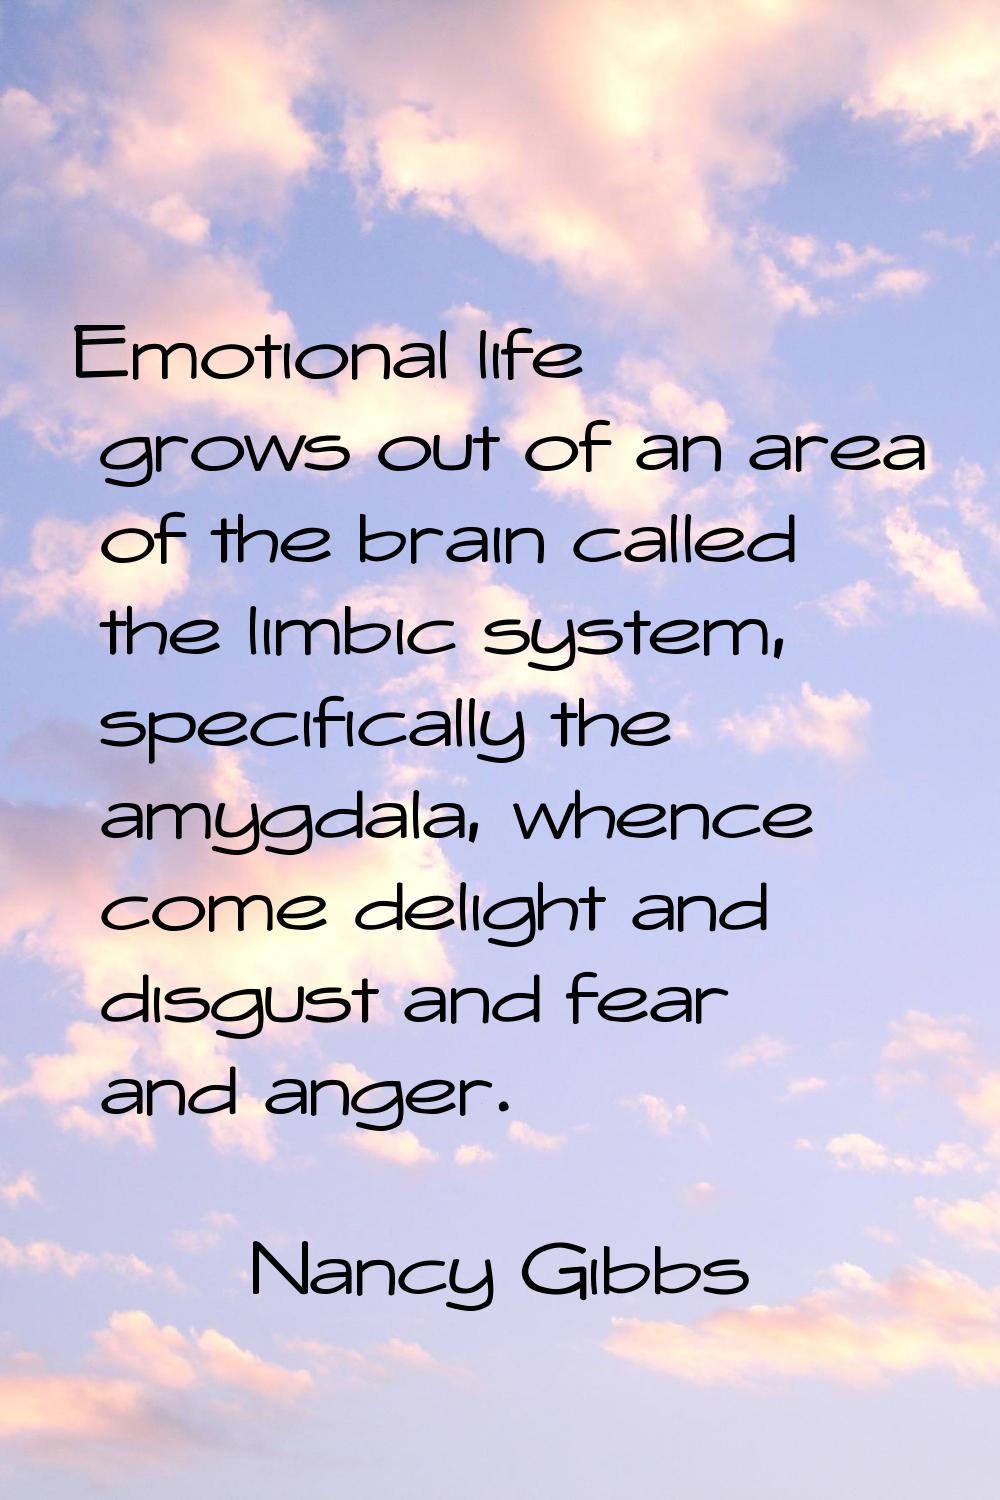 Emotional life grows out of an area of the brain called the limbic system, specifically the amygdal